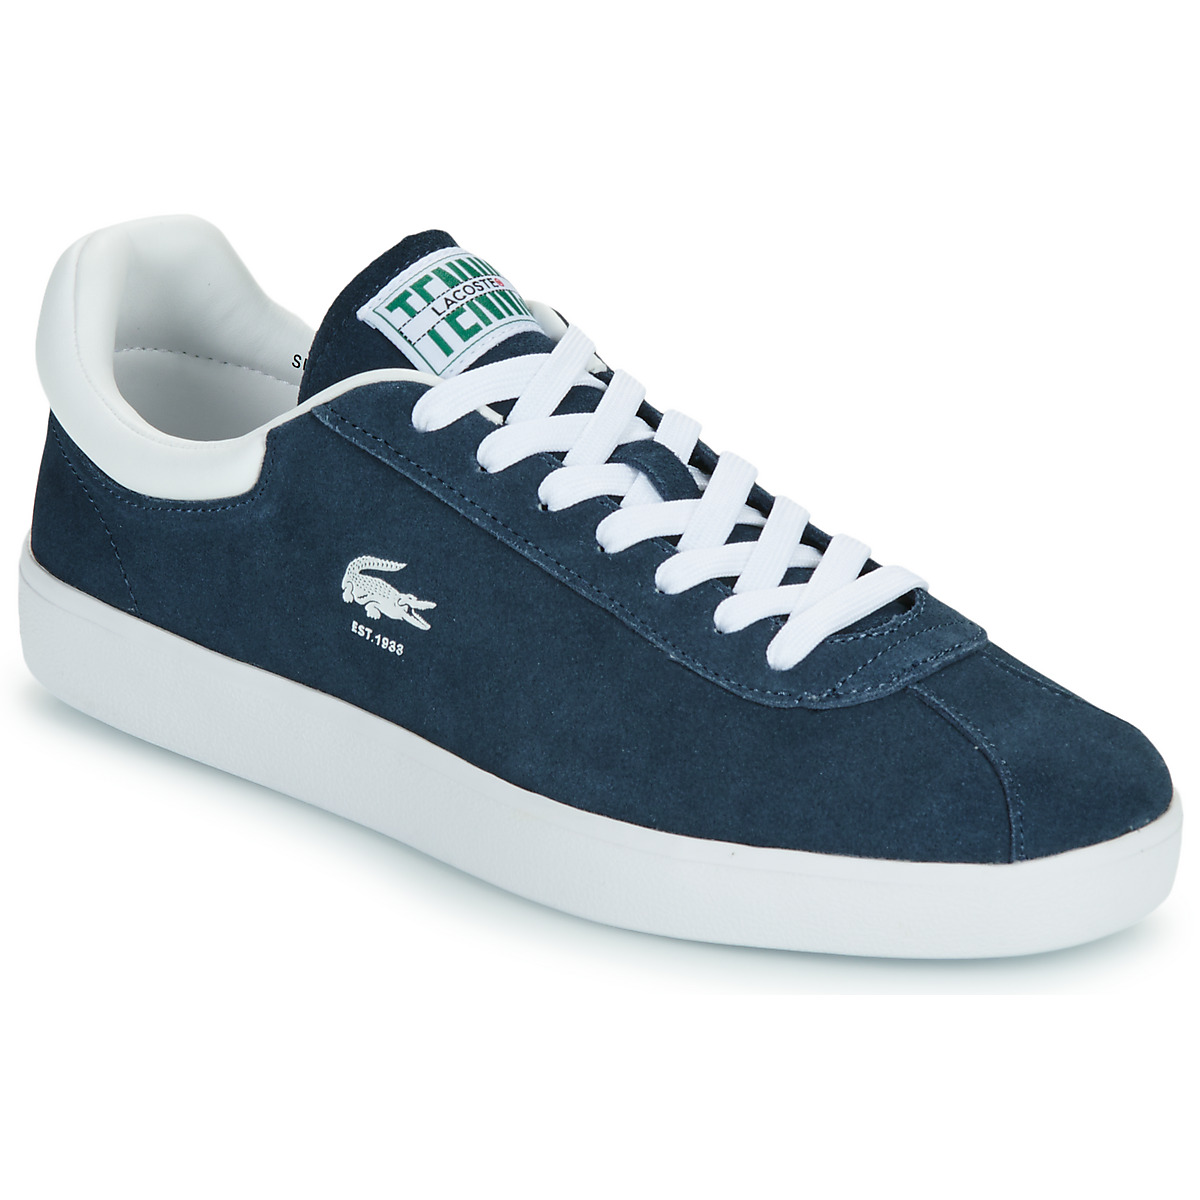 Xαμηλά Sneakers Lacoste BASESHOT